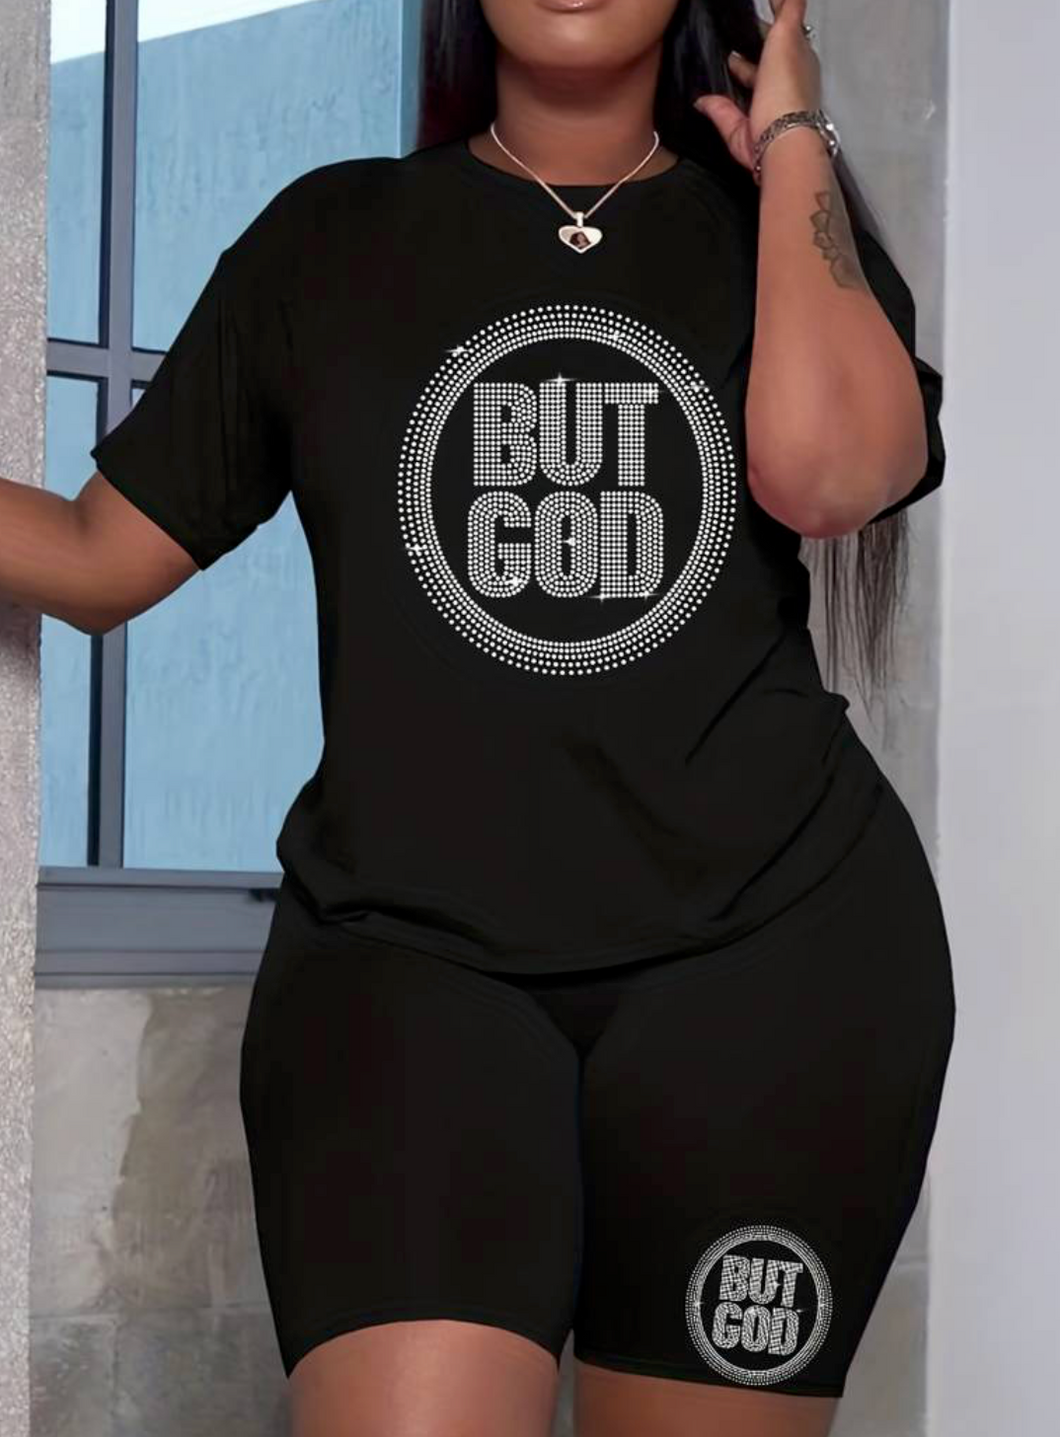 But God Letter Print Two-piece Set, Crew Neck Short Sleeve Tee & Slim Shorts Outfits, Women's Clothing